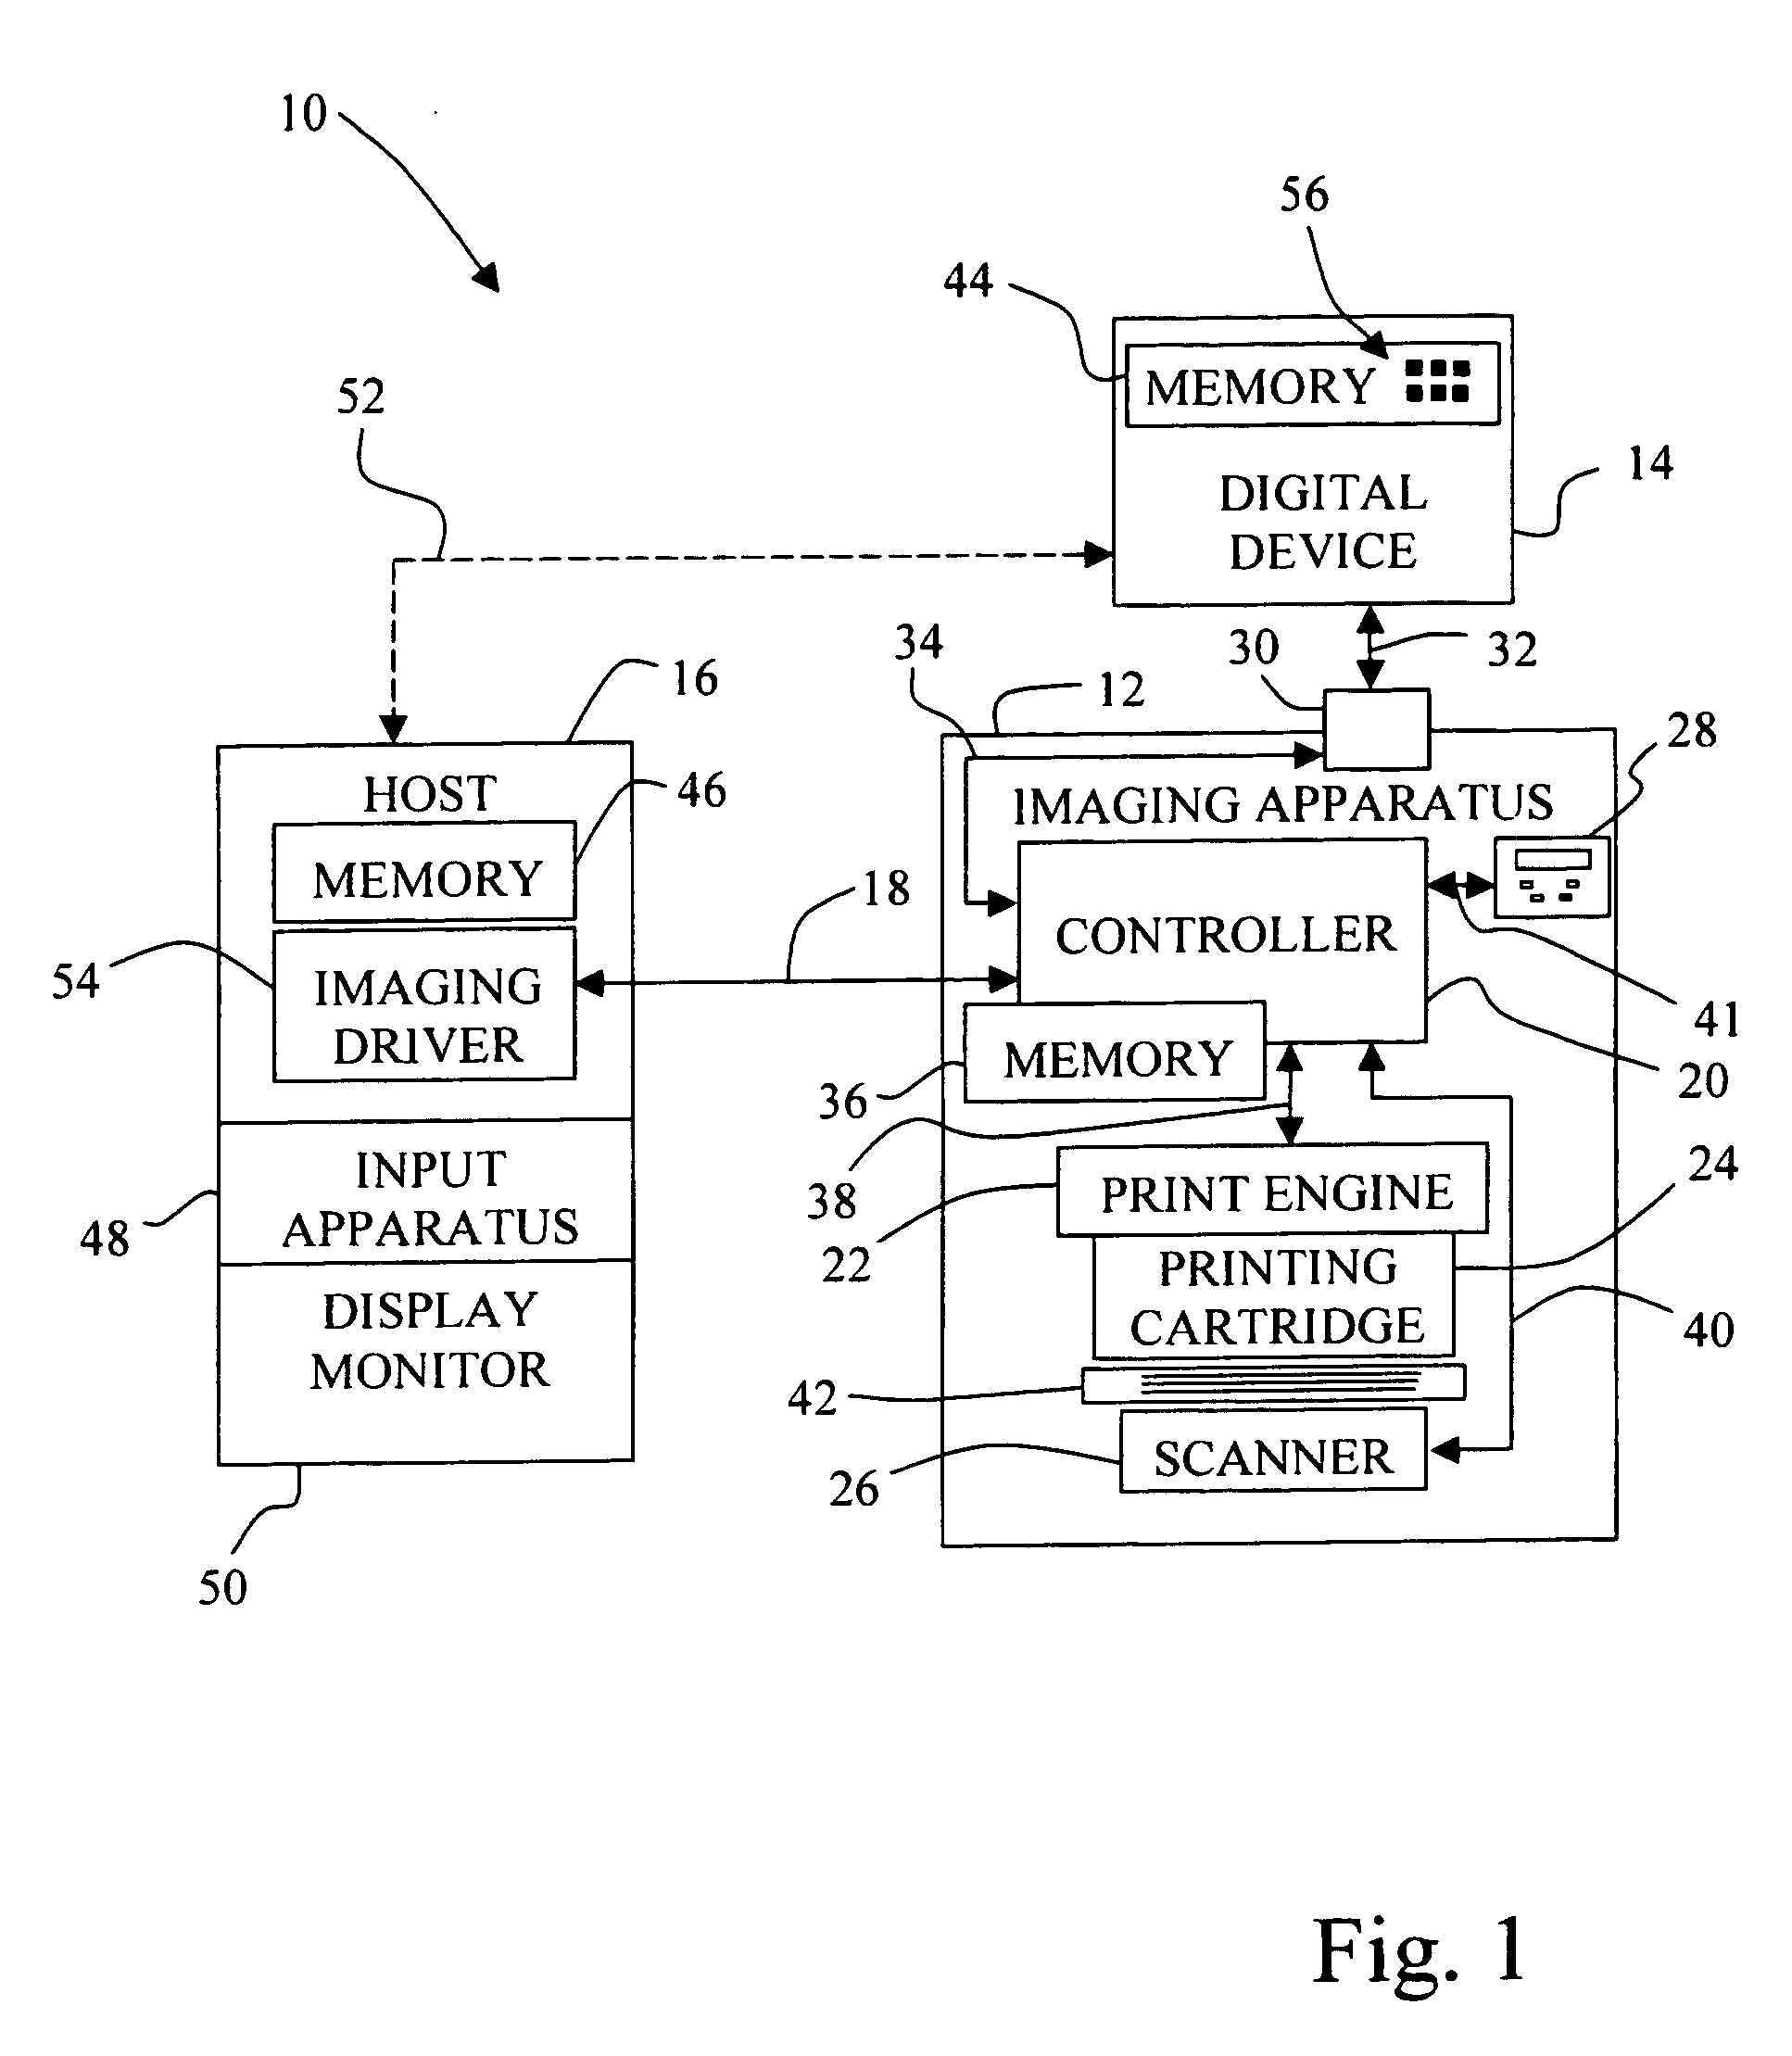 Method for providing image reproduction of digital pictures